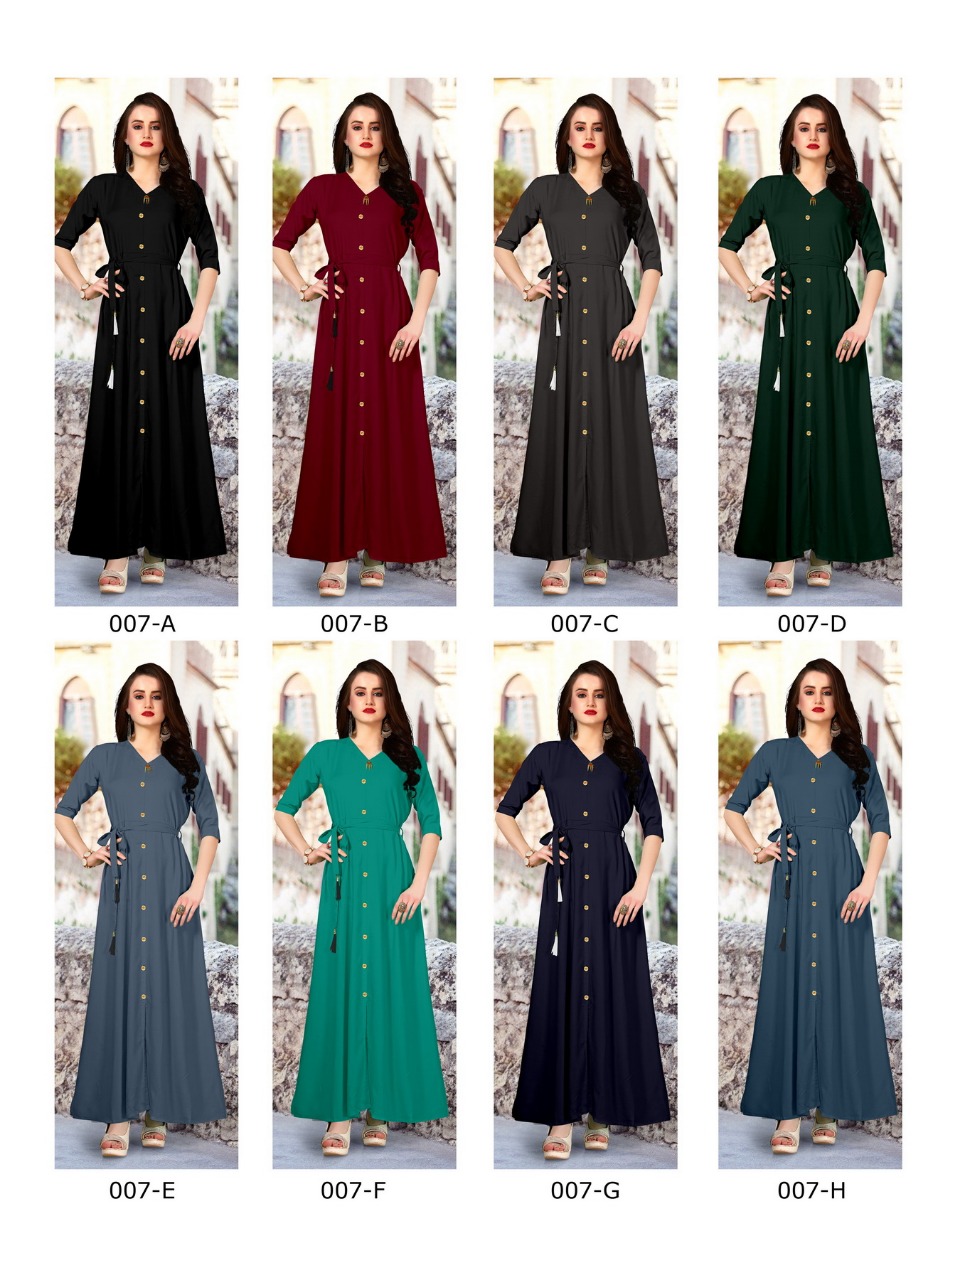 Vee fab india coin master vol 3 colourful long daily wear rayon Kurties Collection